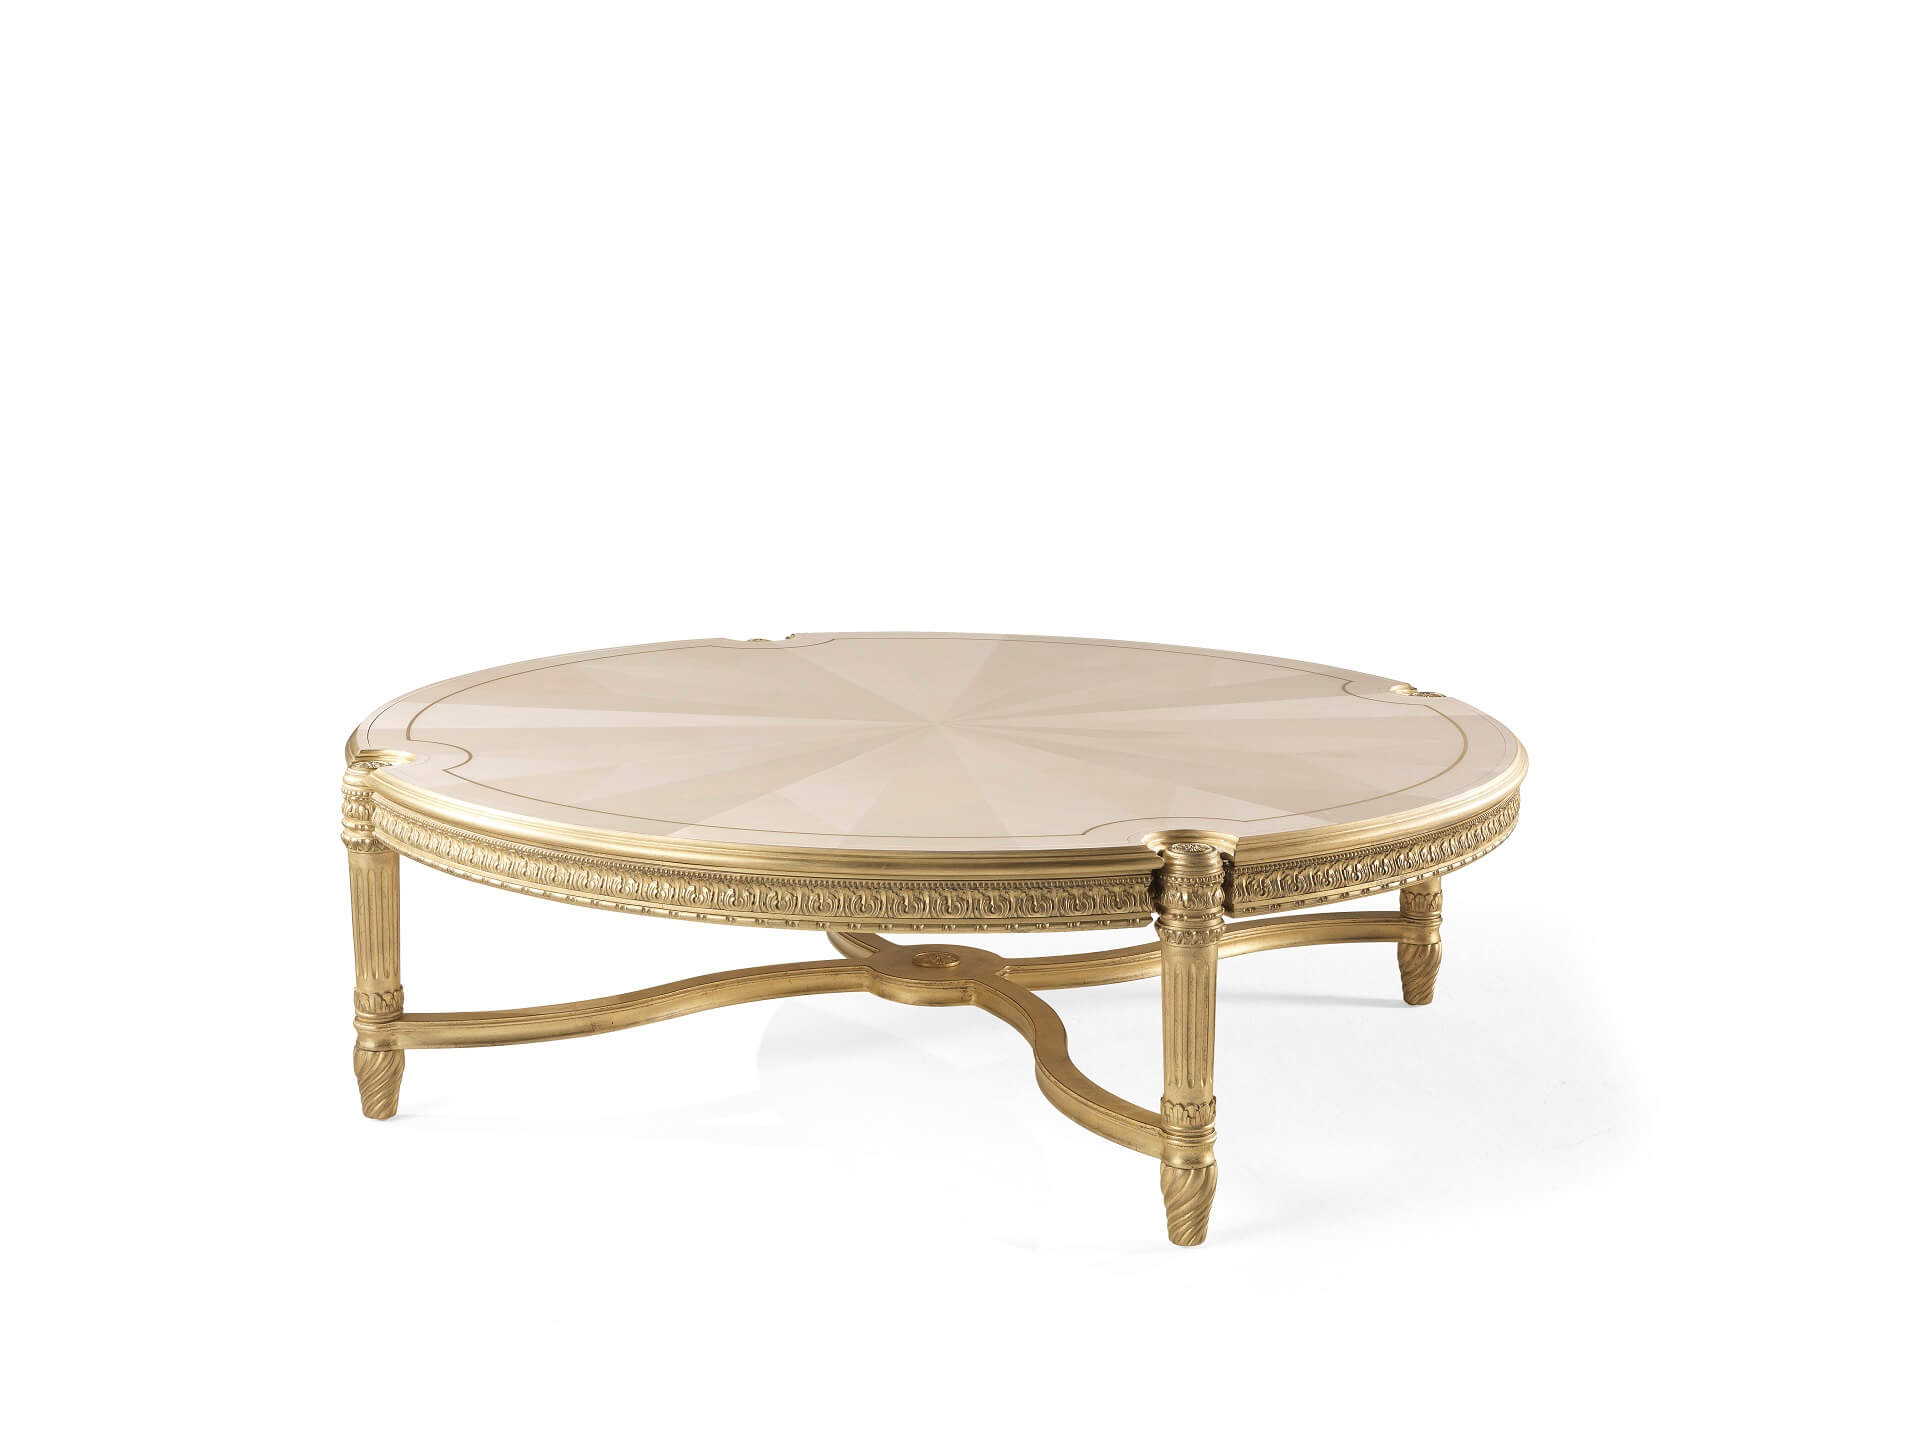 Jumbo Collection Boulevard central table